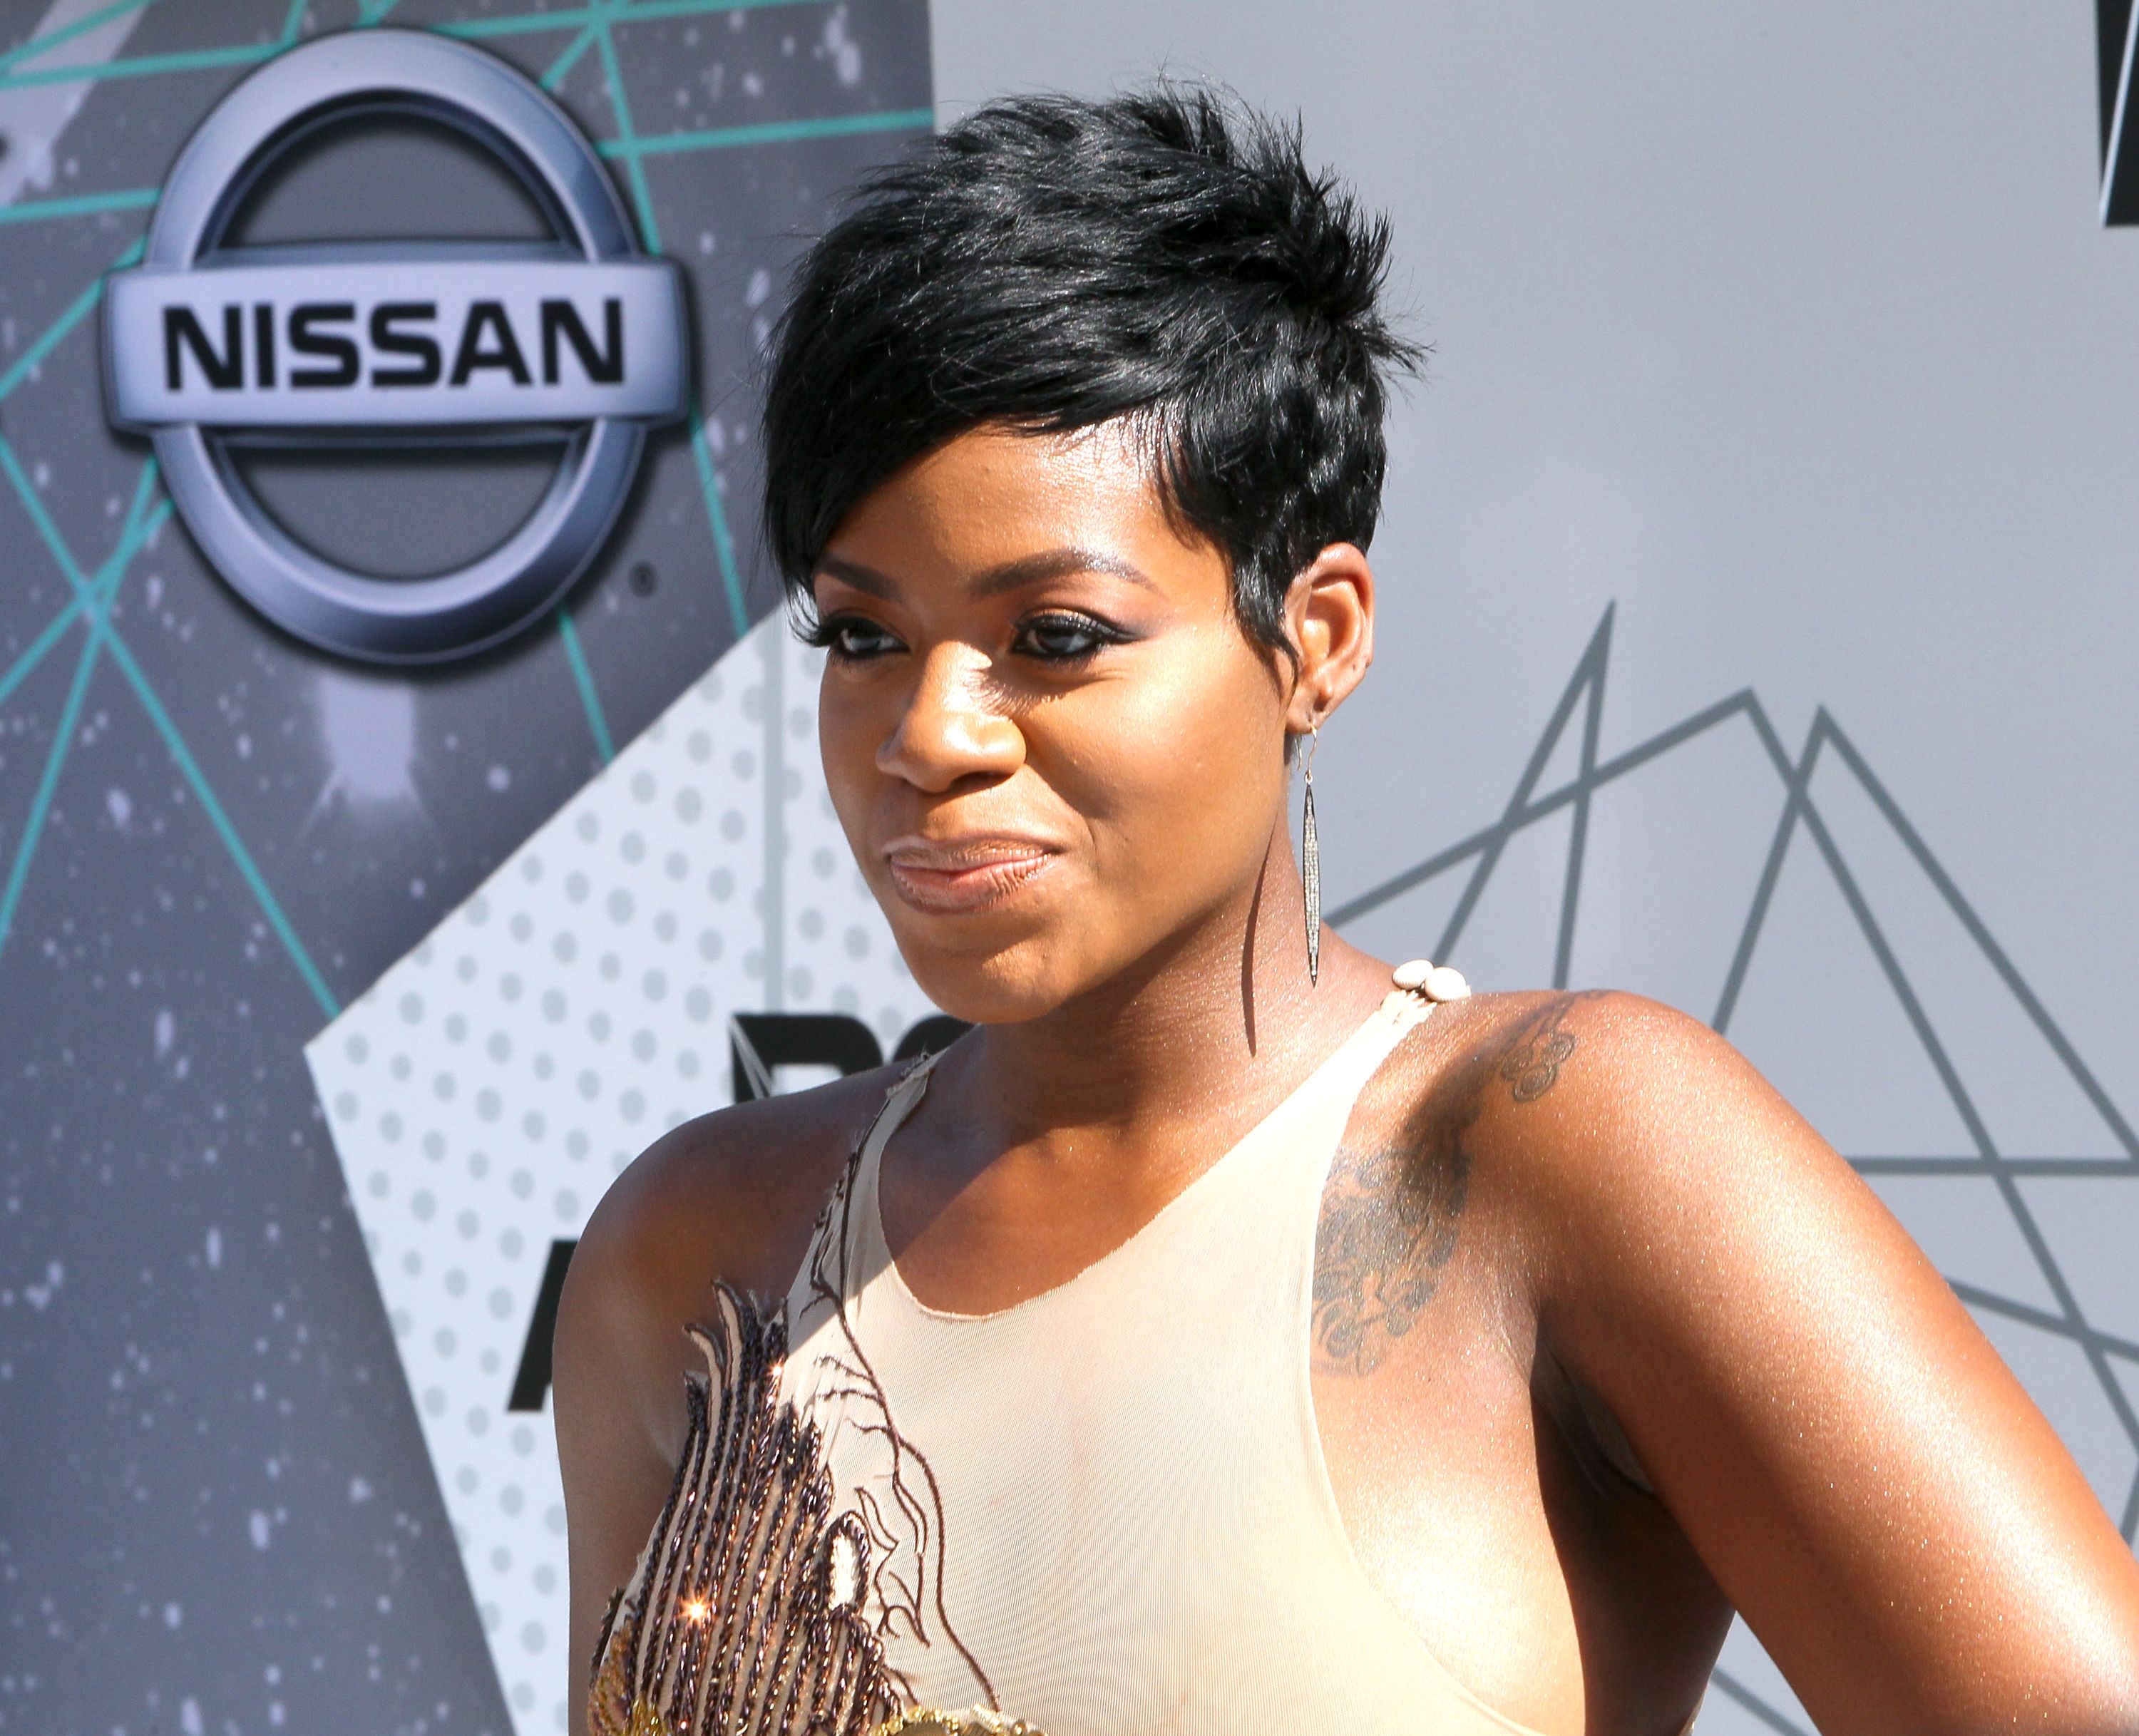 Singer Fantasia Barrino attends the 2016 BET Awards at the Microsoft Theater on June 26, 2016. | Photo: Getty Images